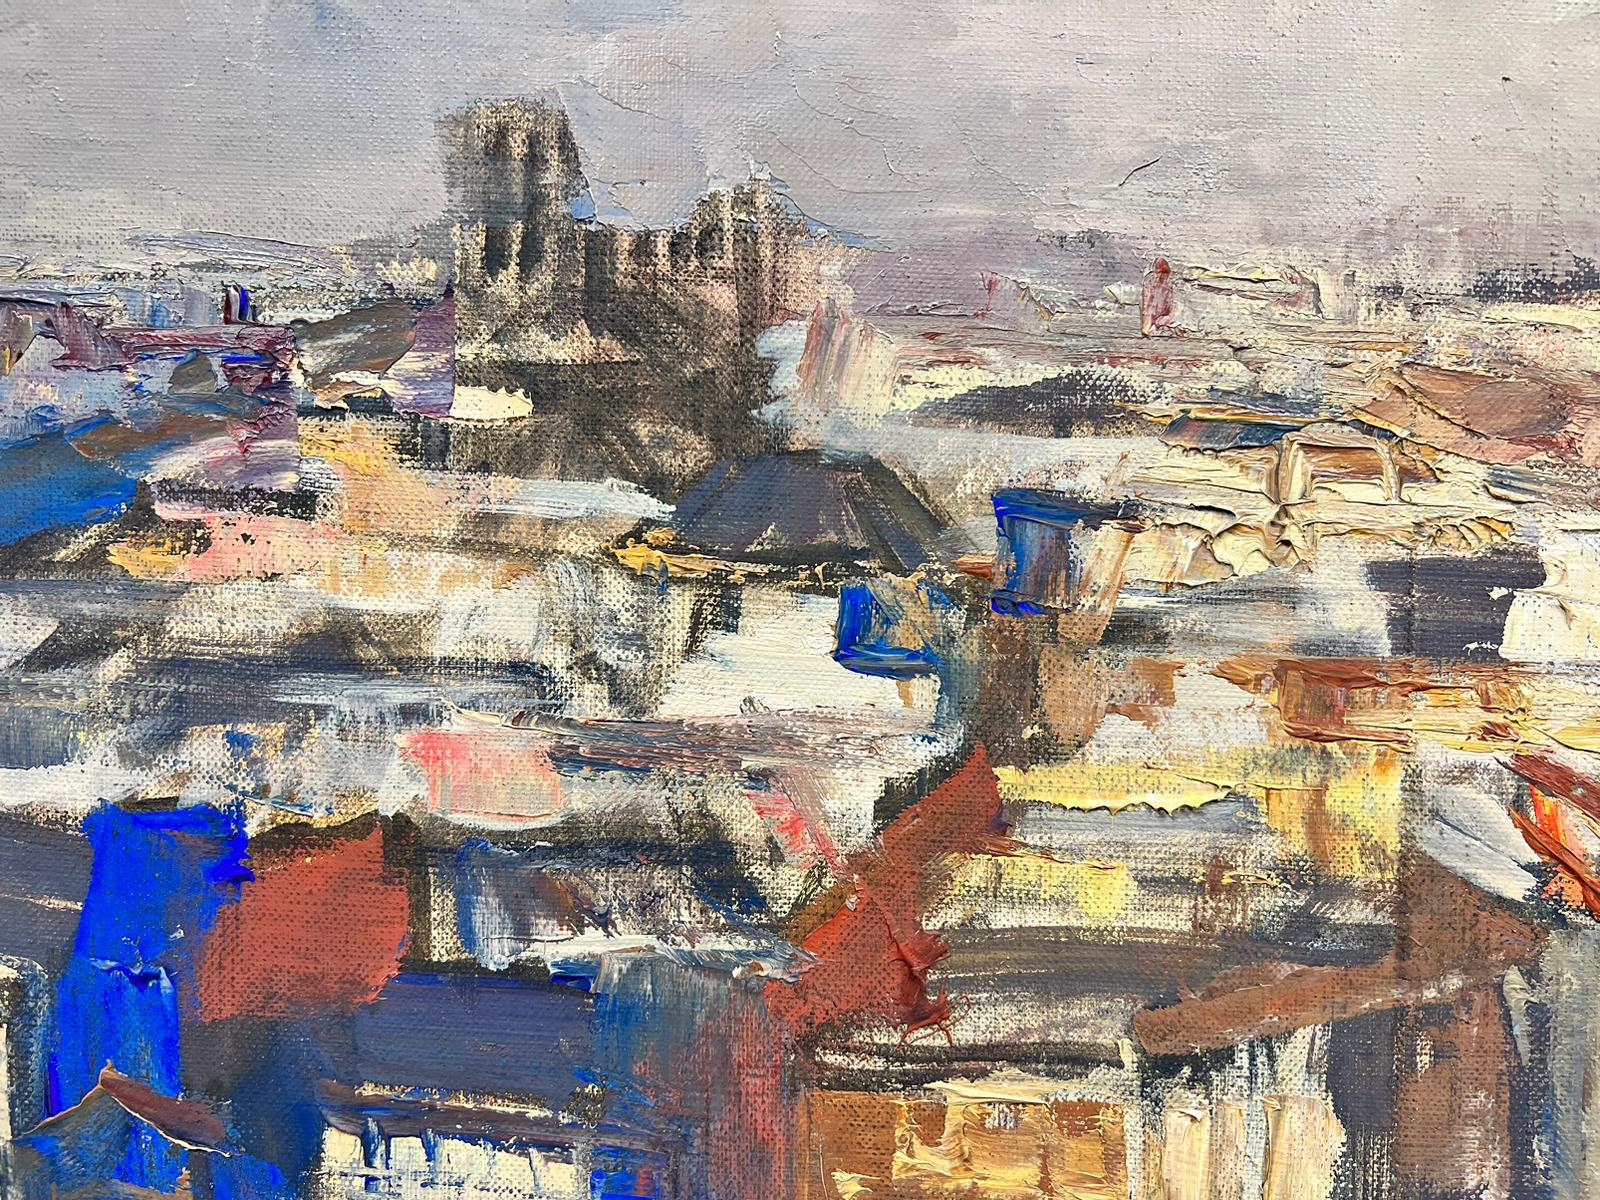 Paris
by Josine Vignon (French 1922-2022)
oil painting on canvas, unframed

canvas: 18 x 24 inches

Colors: Blue colors, grey, white and red

Very good condition though the stretcher bars indentations running centrally are showing. 

Provenance: